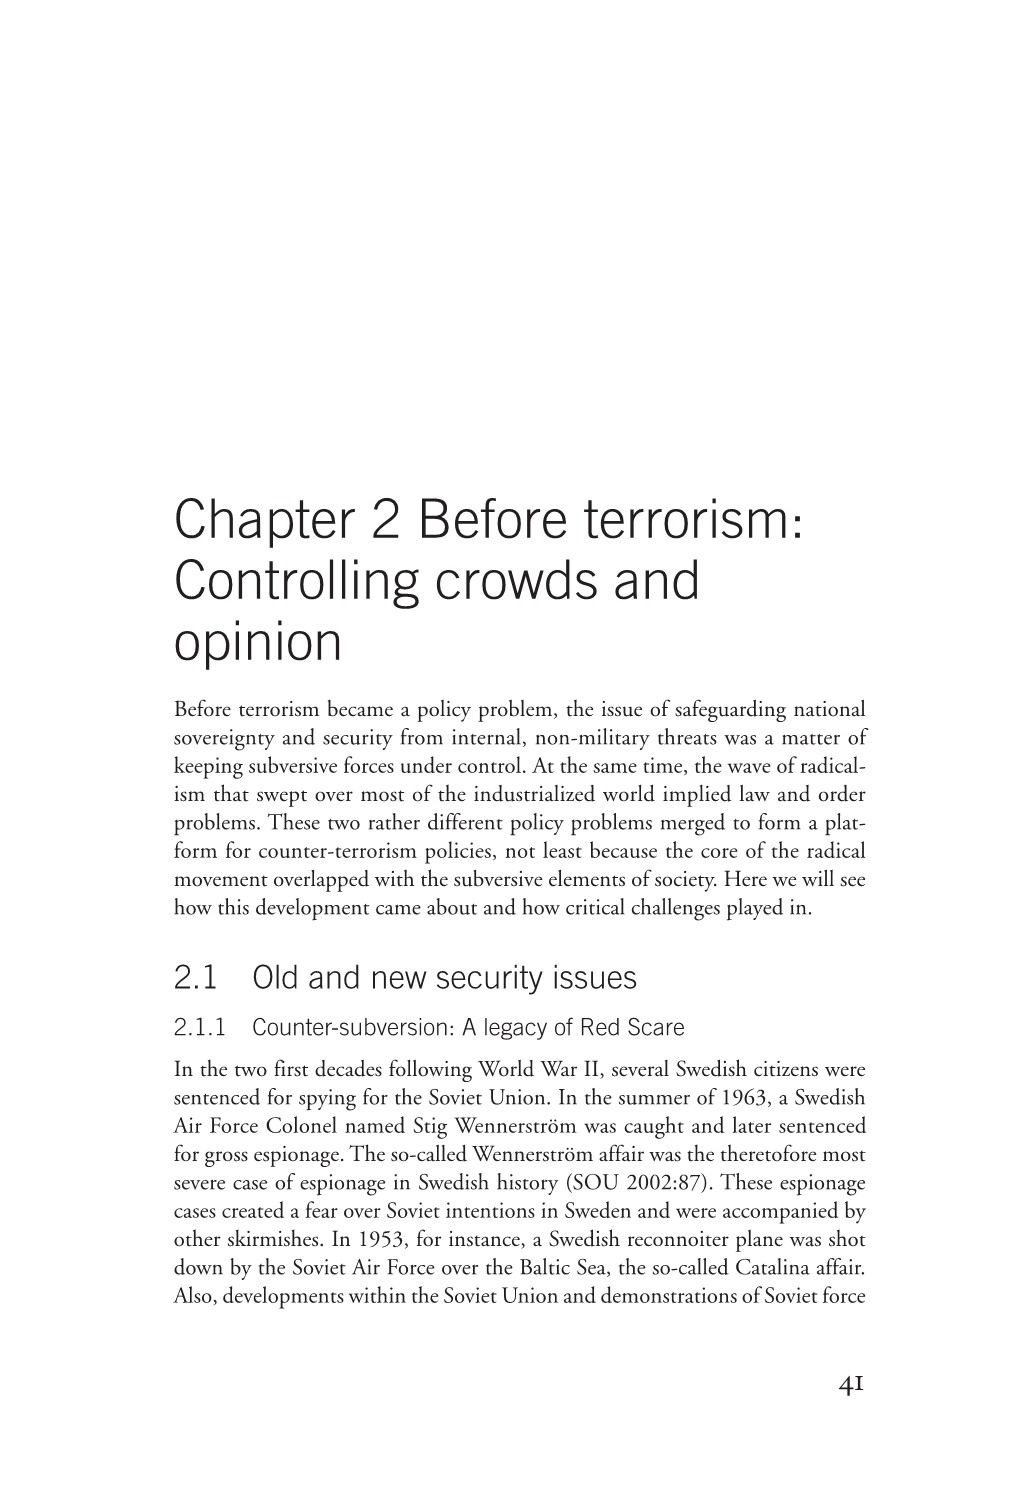 Chapter 2 Before Terrorism: Controlling Crowds and Opinion